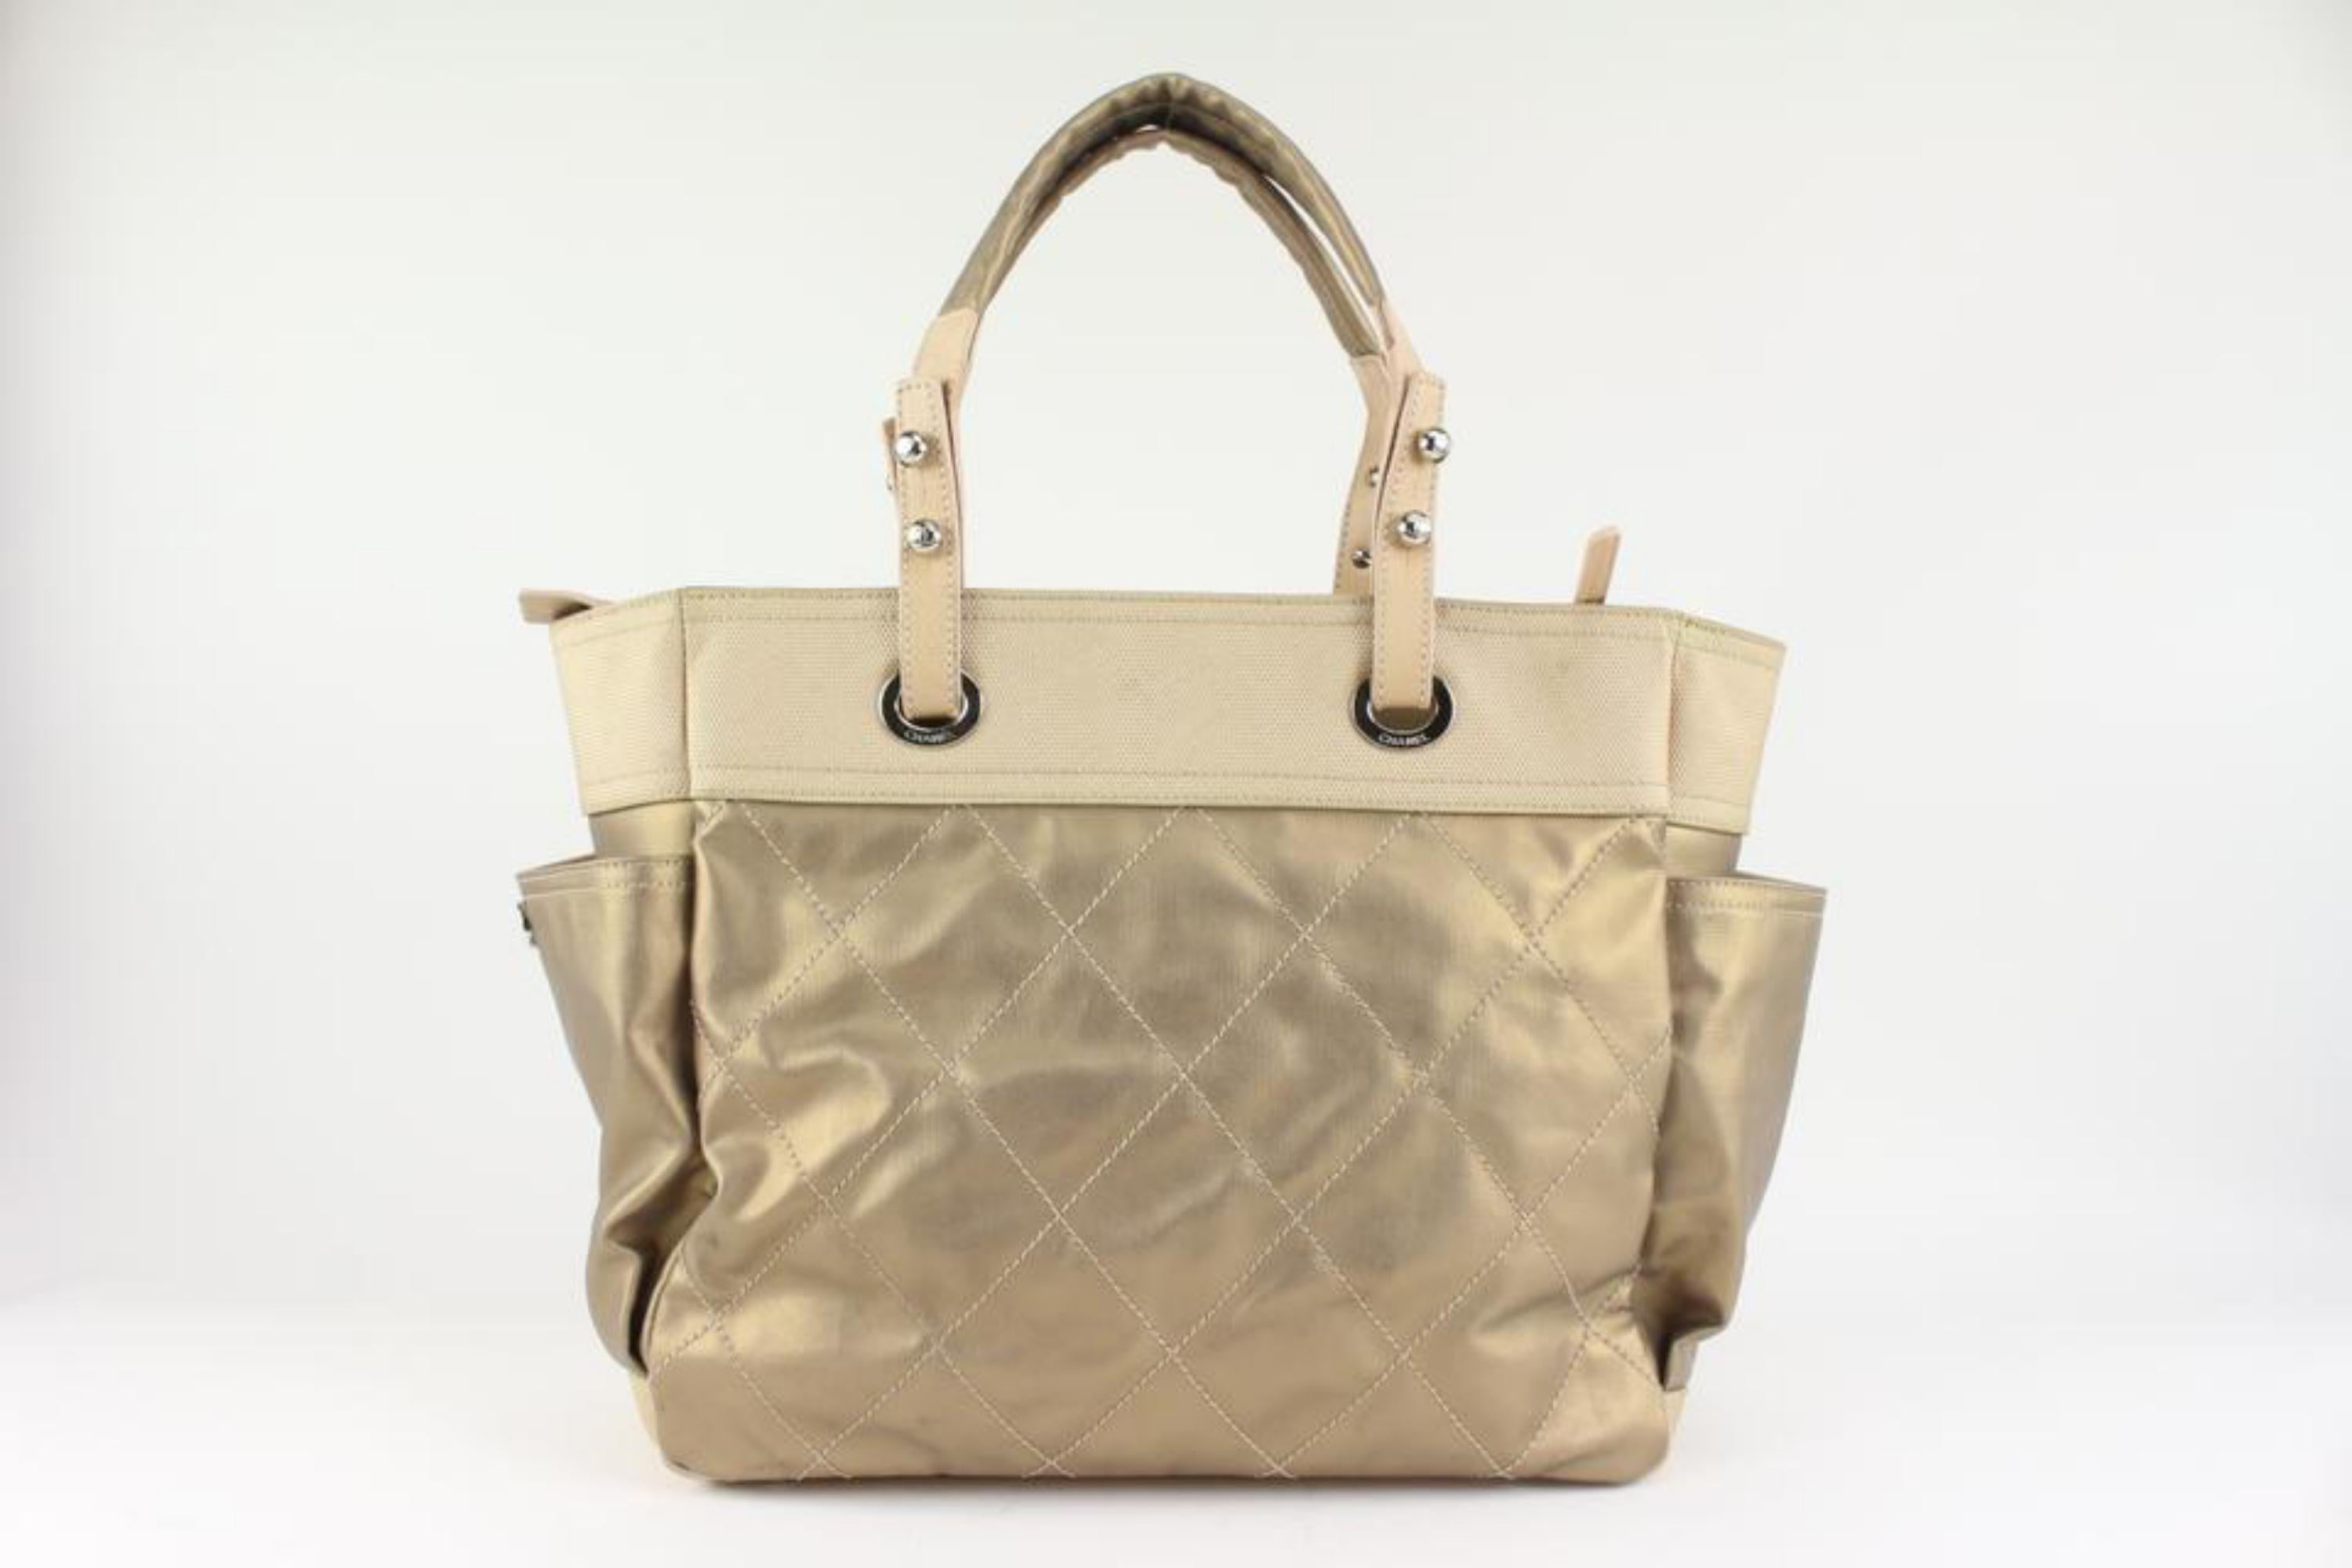 Chanel Gold Biarritz GM Tote with Pouch 1215c3 3